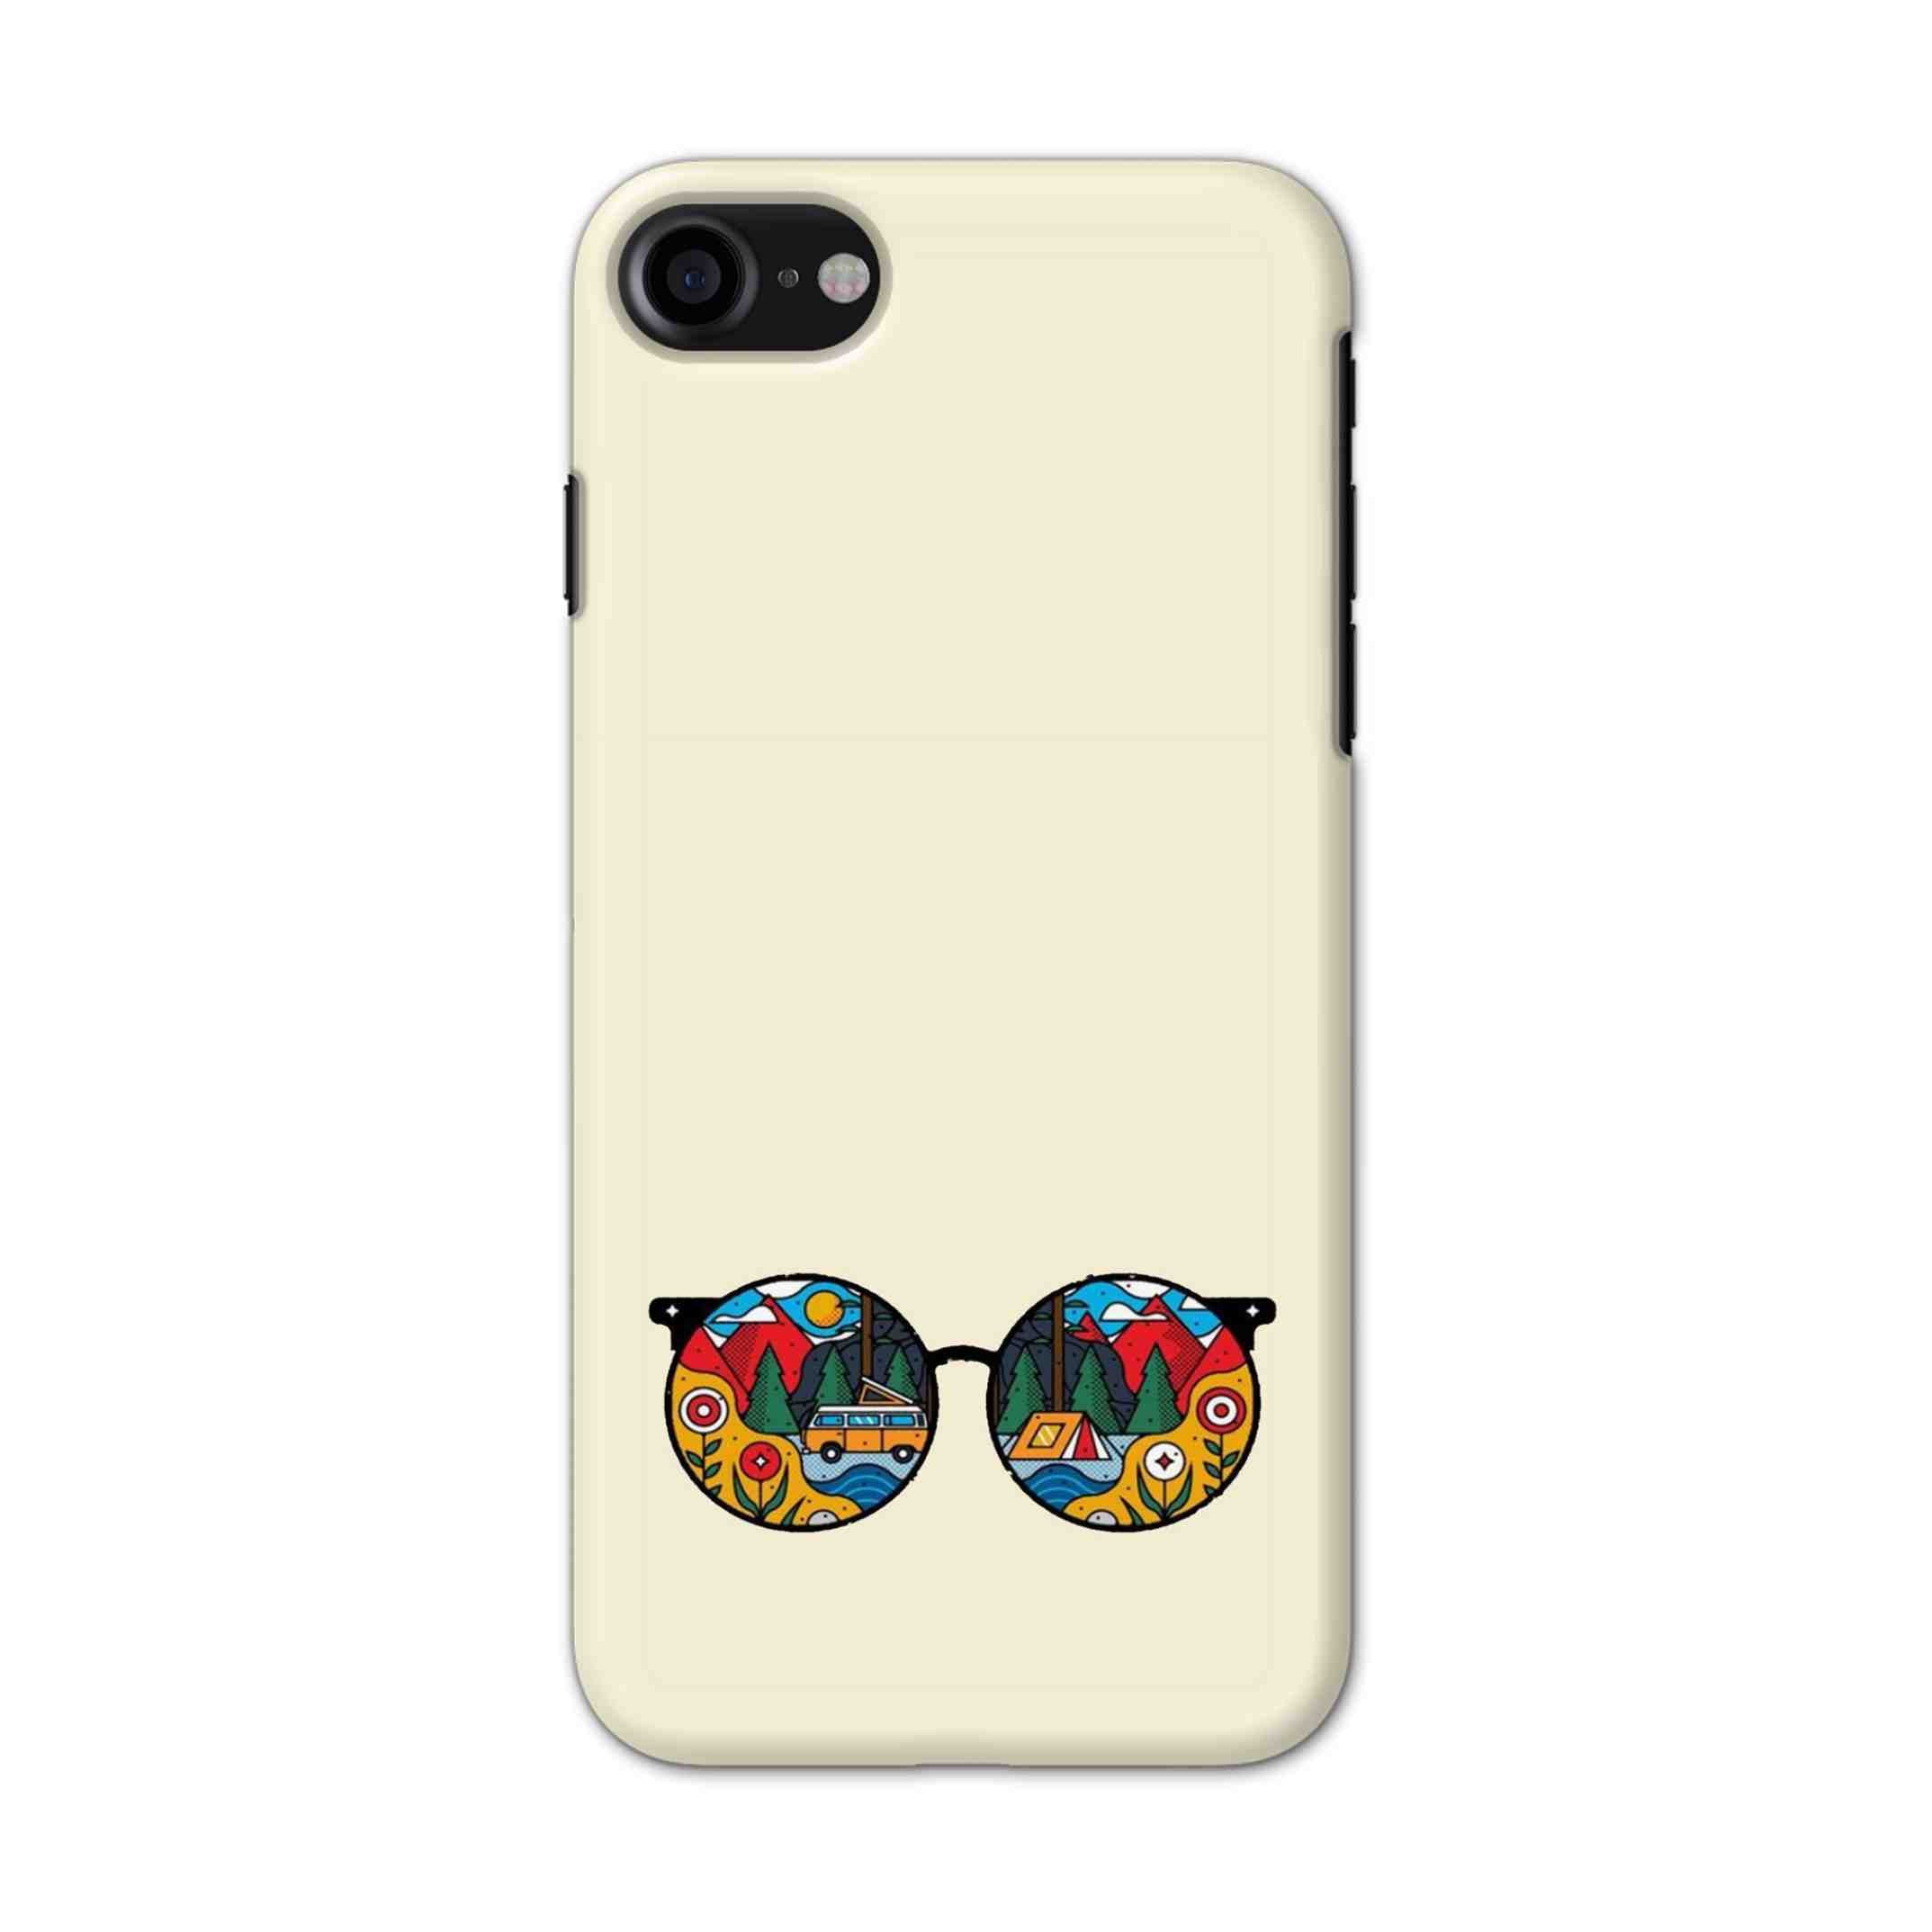 Buy Rainbow Sunglasses Hard Back Mobile Phone Case/Cover For iPhone 7 / 8 Online